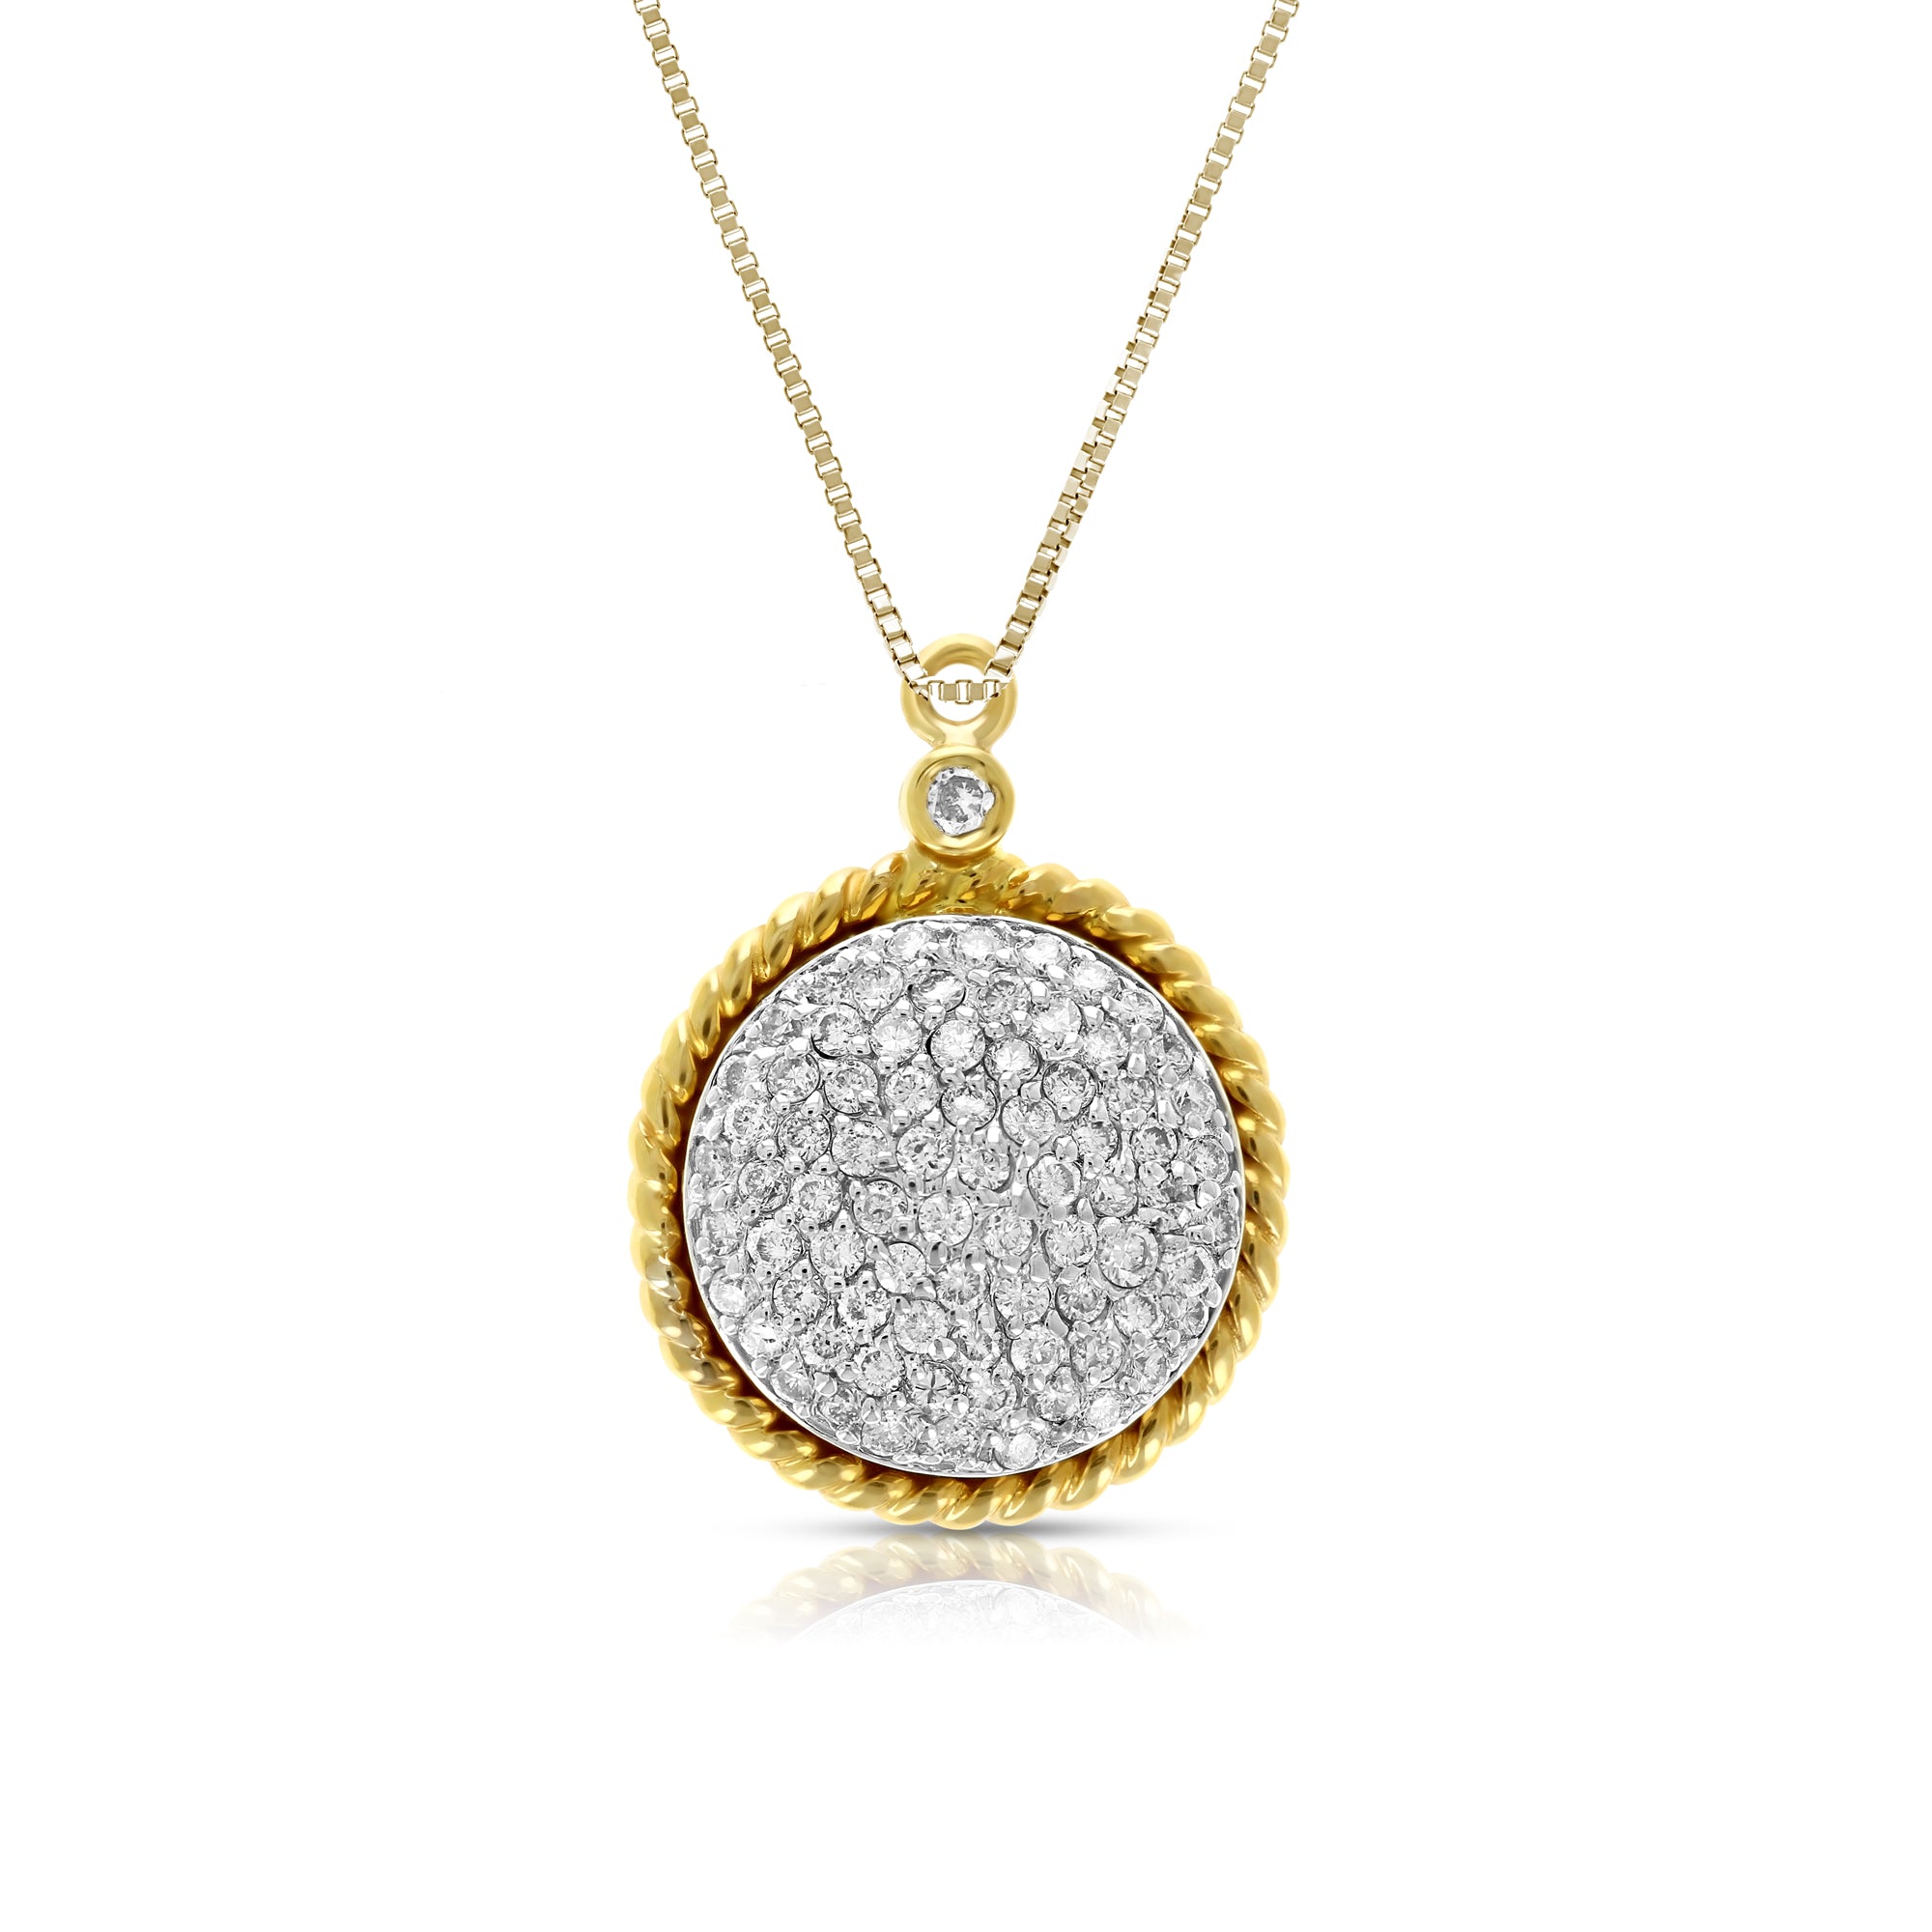 0.60 cttw Diamond Pendant, Diamond Circle Composite Pendant Necklace for Women in 14K Yellow Gold with 18 Inch Chain, Prong Setting